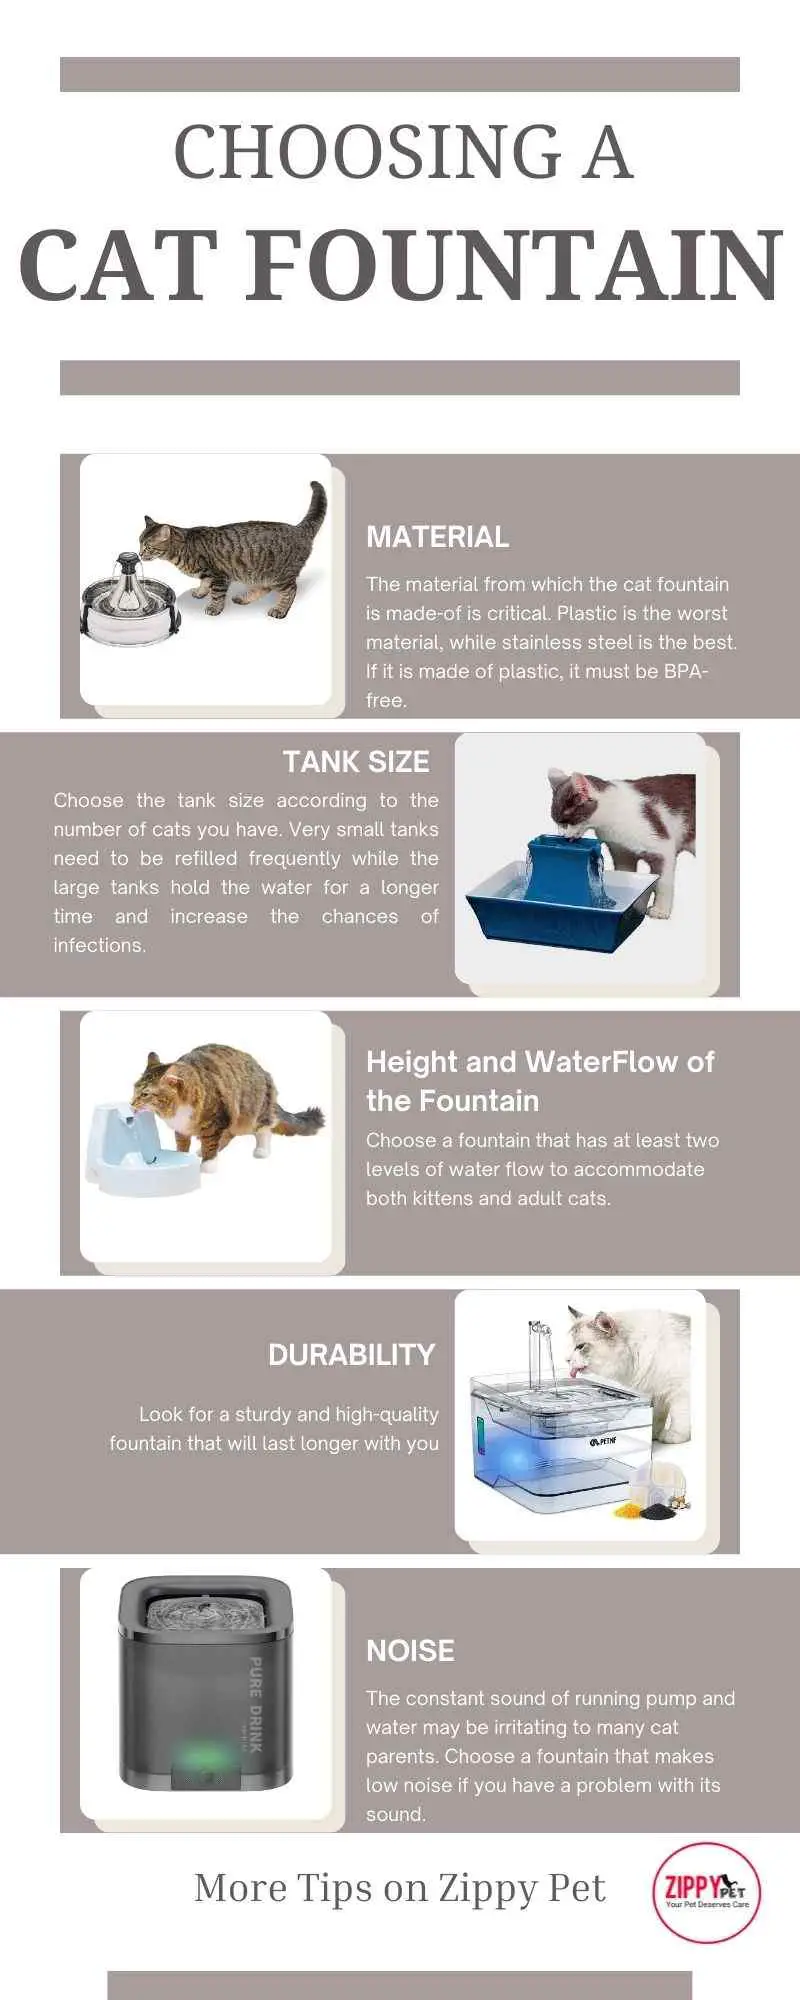 This infographic shows how to choose a cat water fountain